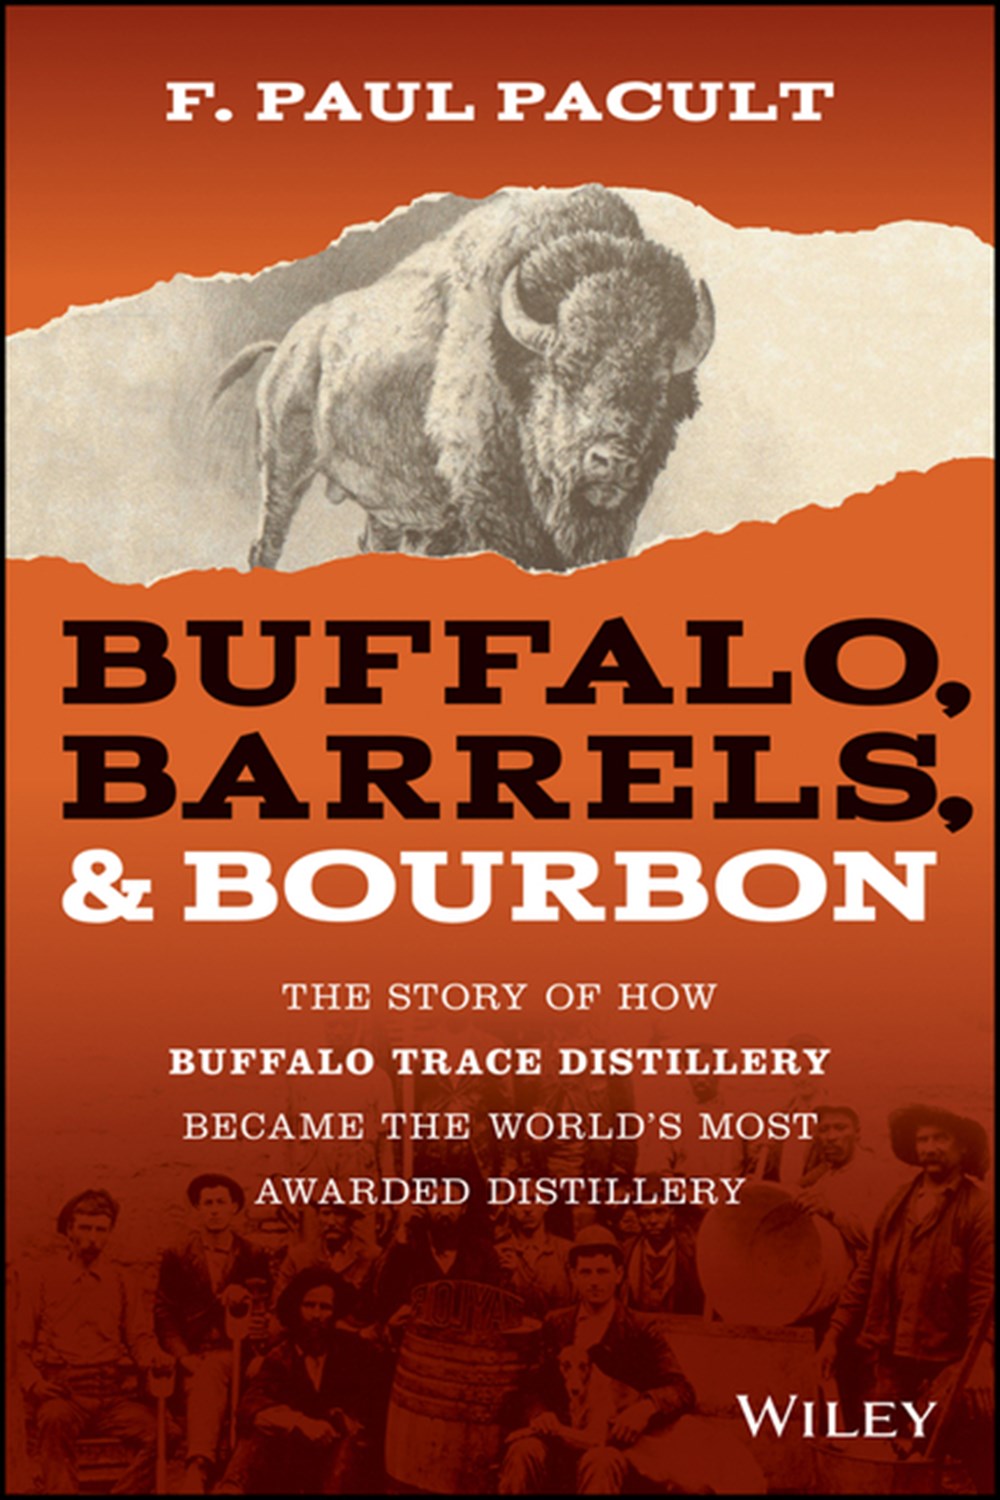 Buffalo, Barrels, & Bourbon The Story of How Buffalo Trace Distillery Became the World's Most Awarde